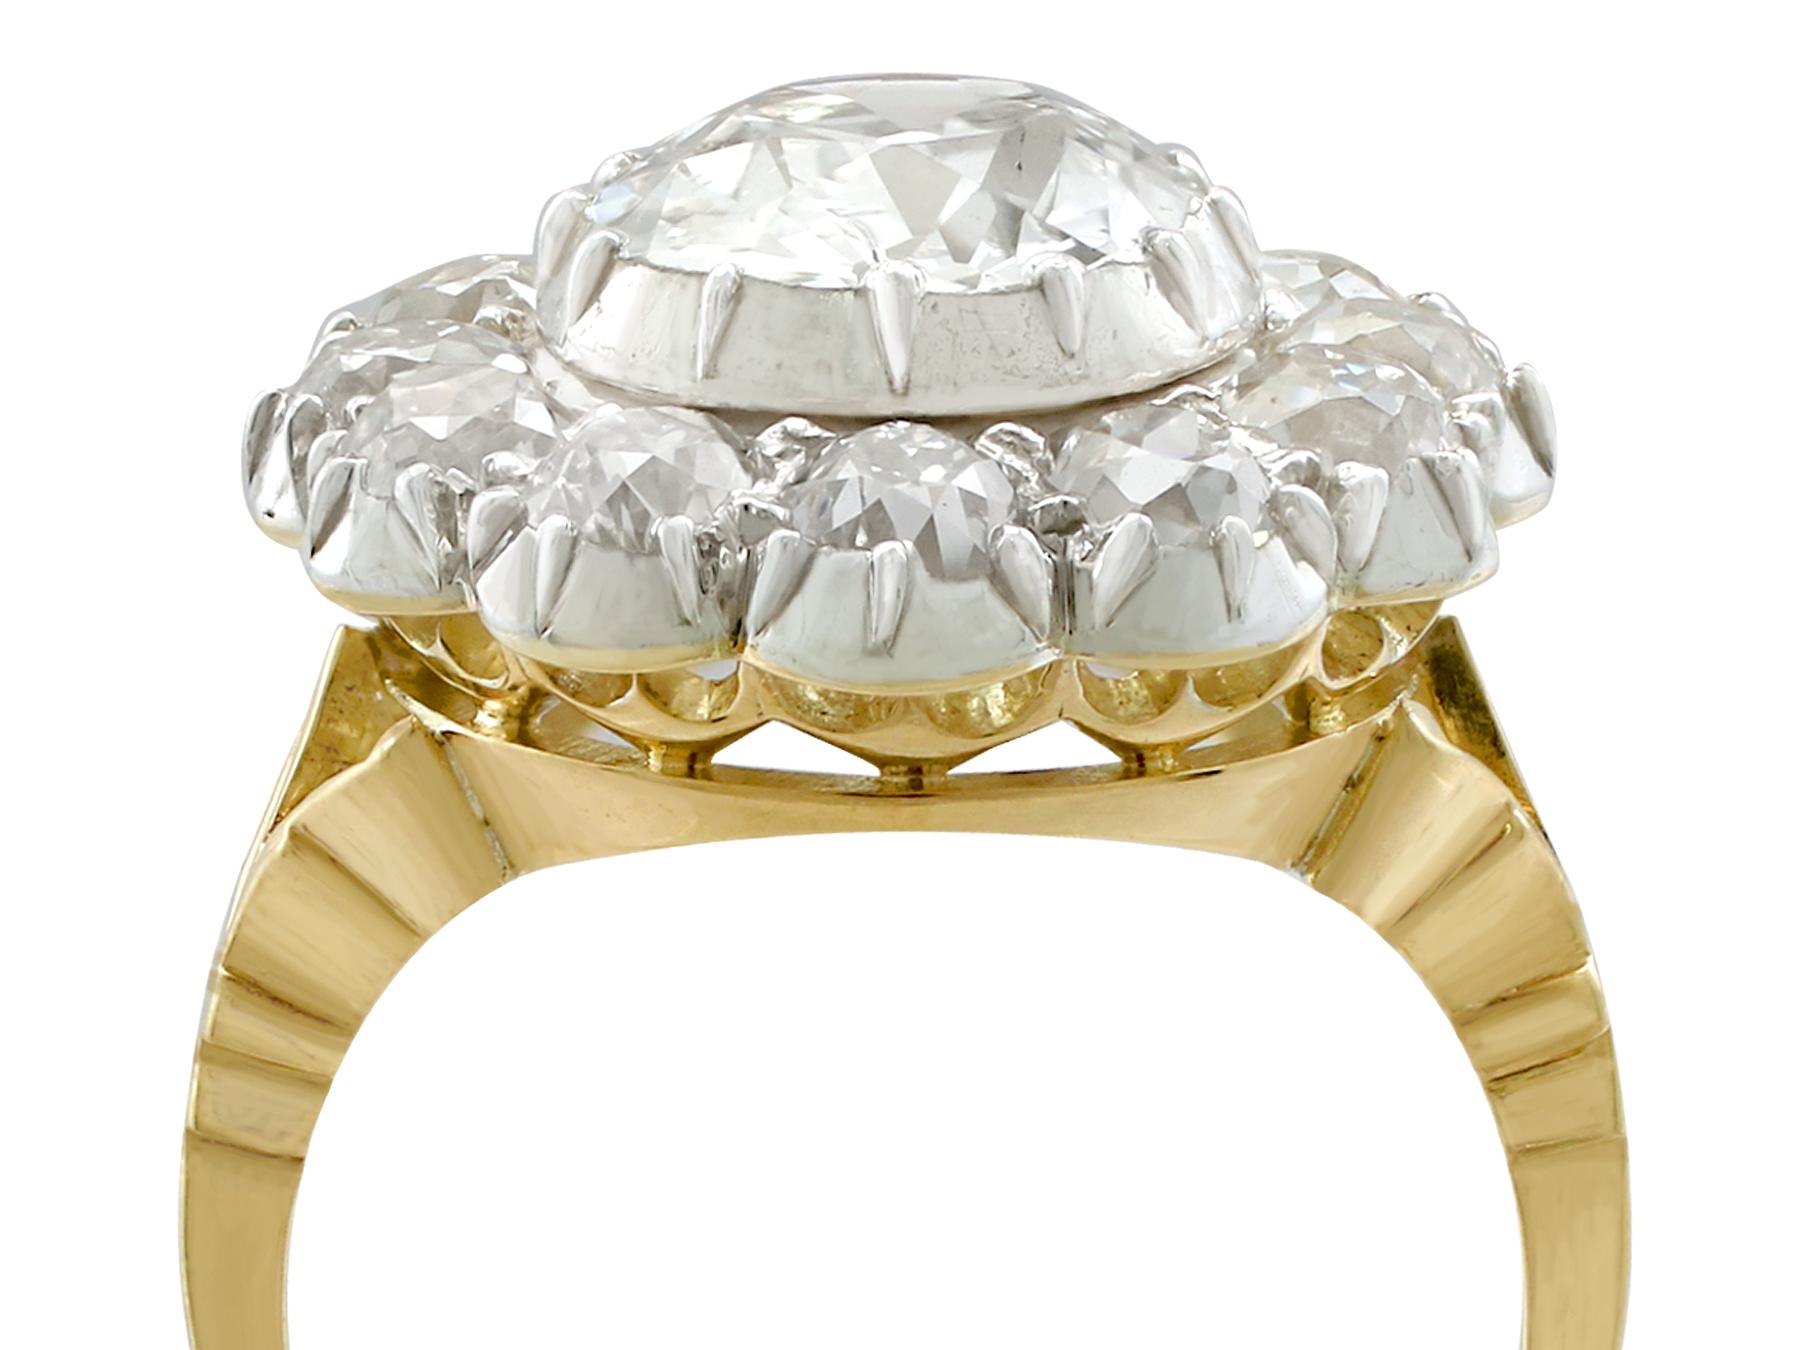 A stunning large 5.27 carat diamond and 18 karat yellow gold, silver set cluster style cocktail ring; part of our diverse antique jewelry and estate jewelry collections

This stunning, fine and impressive large diamond cluster ring has been crafted